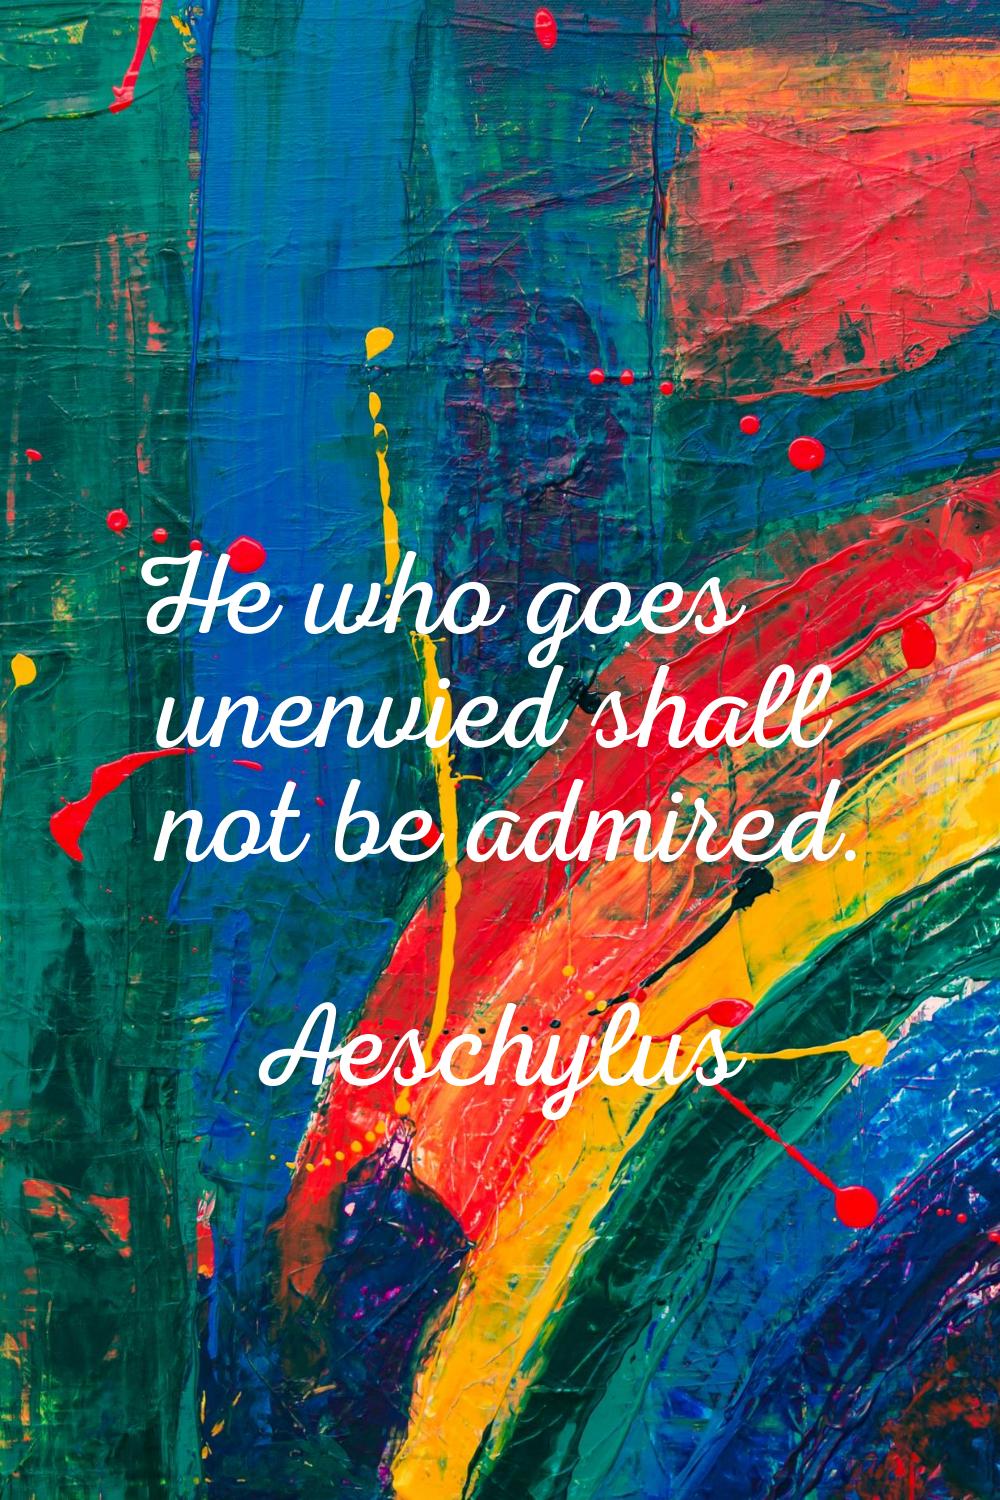 He who goes unenvied shall not be admired.